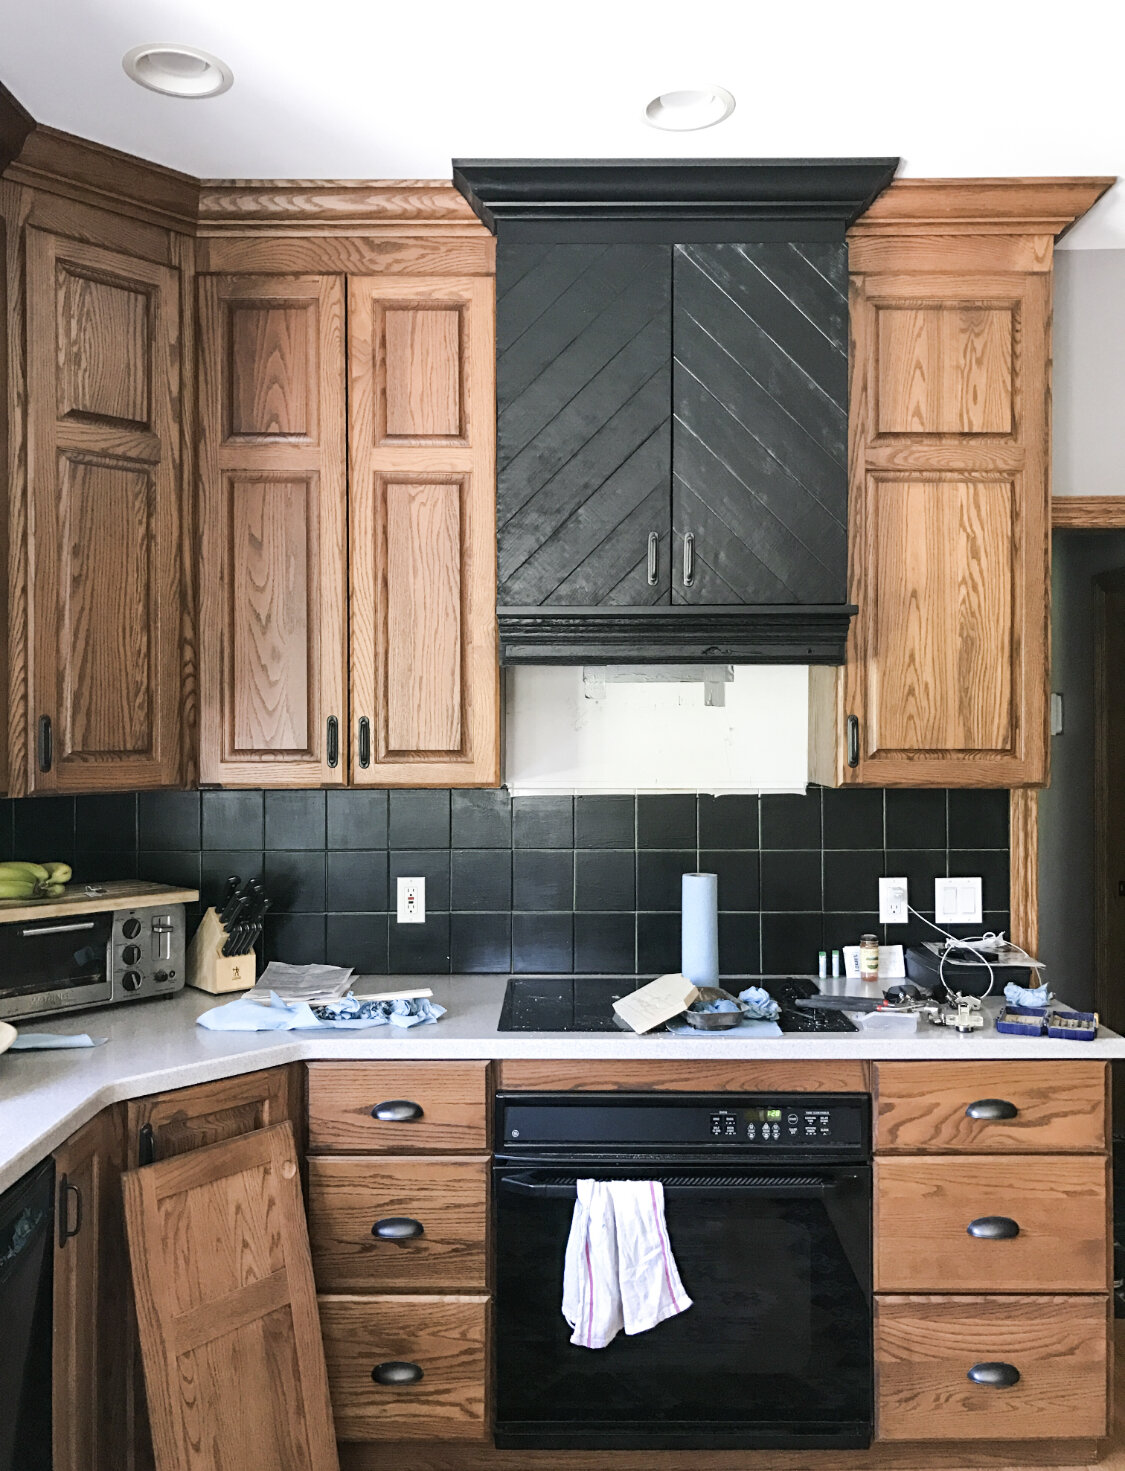 How To Make An Oak Kitchen Cool Again, Are Oak Kitchen Cabinets Still In Style